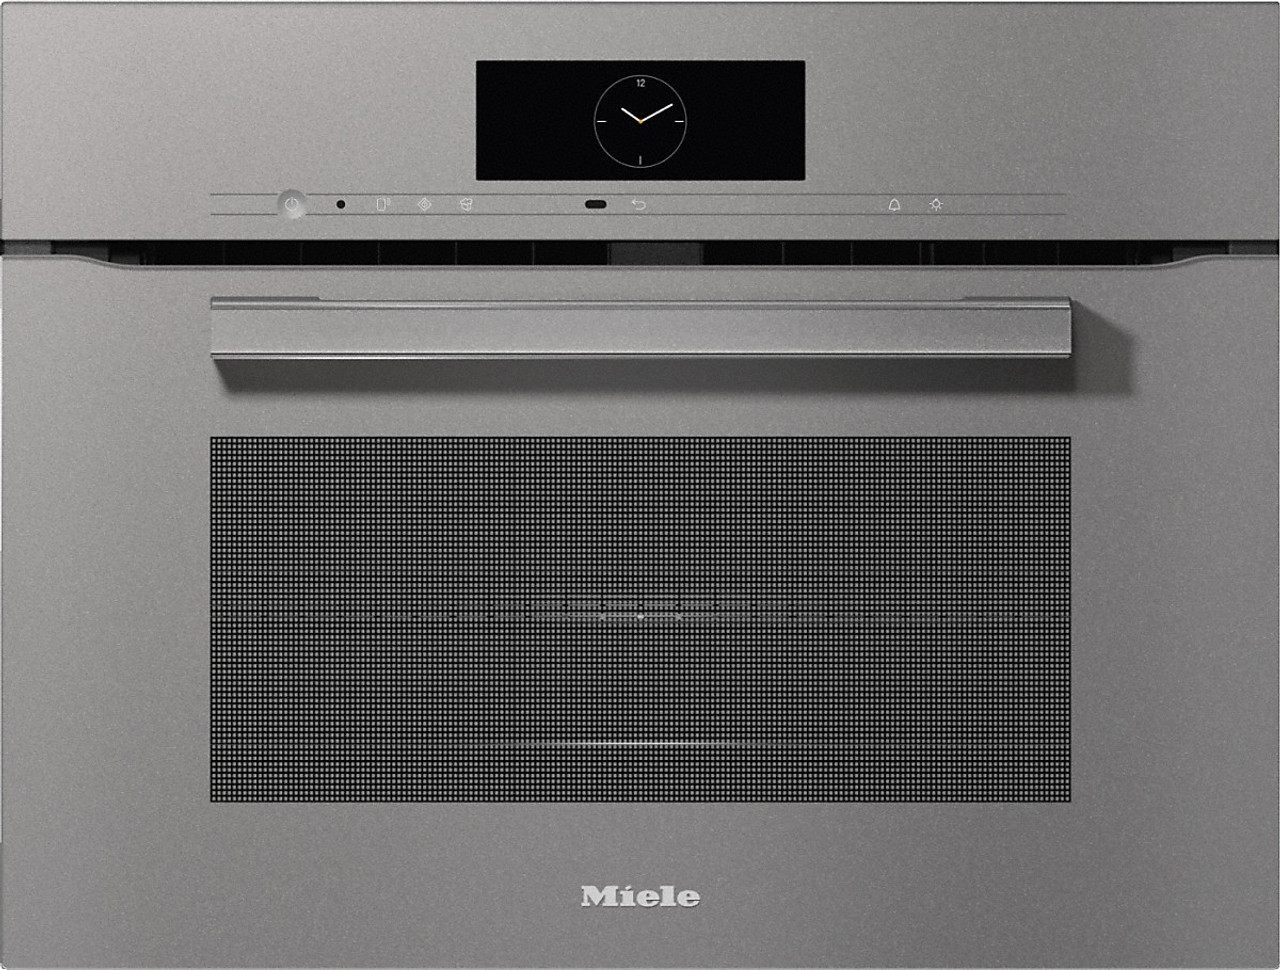 H 7840 BM - Speed Oven With Seamless Design - Graphite Grey